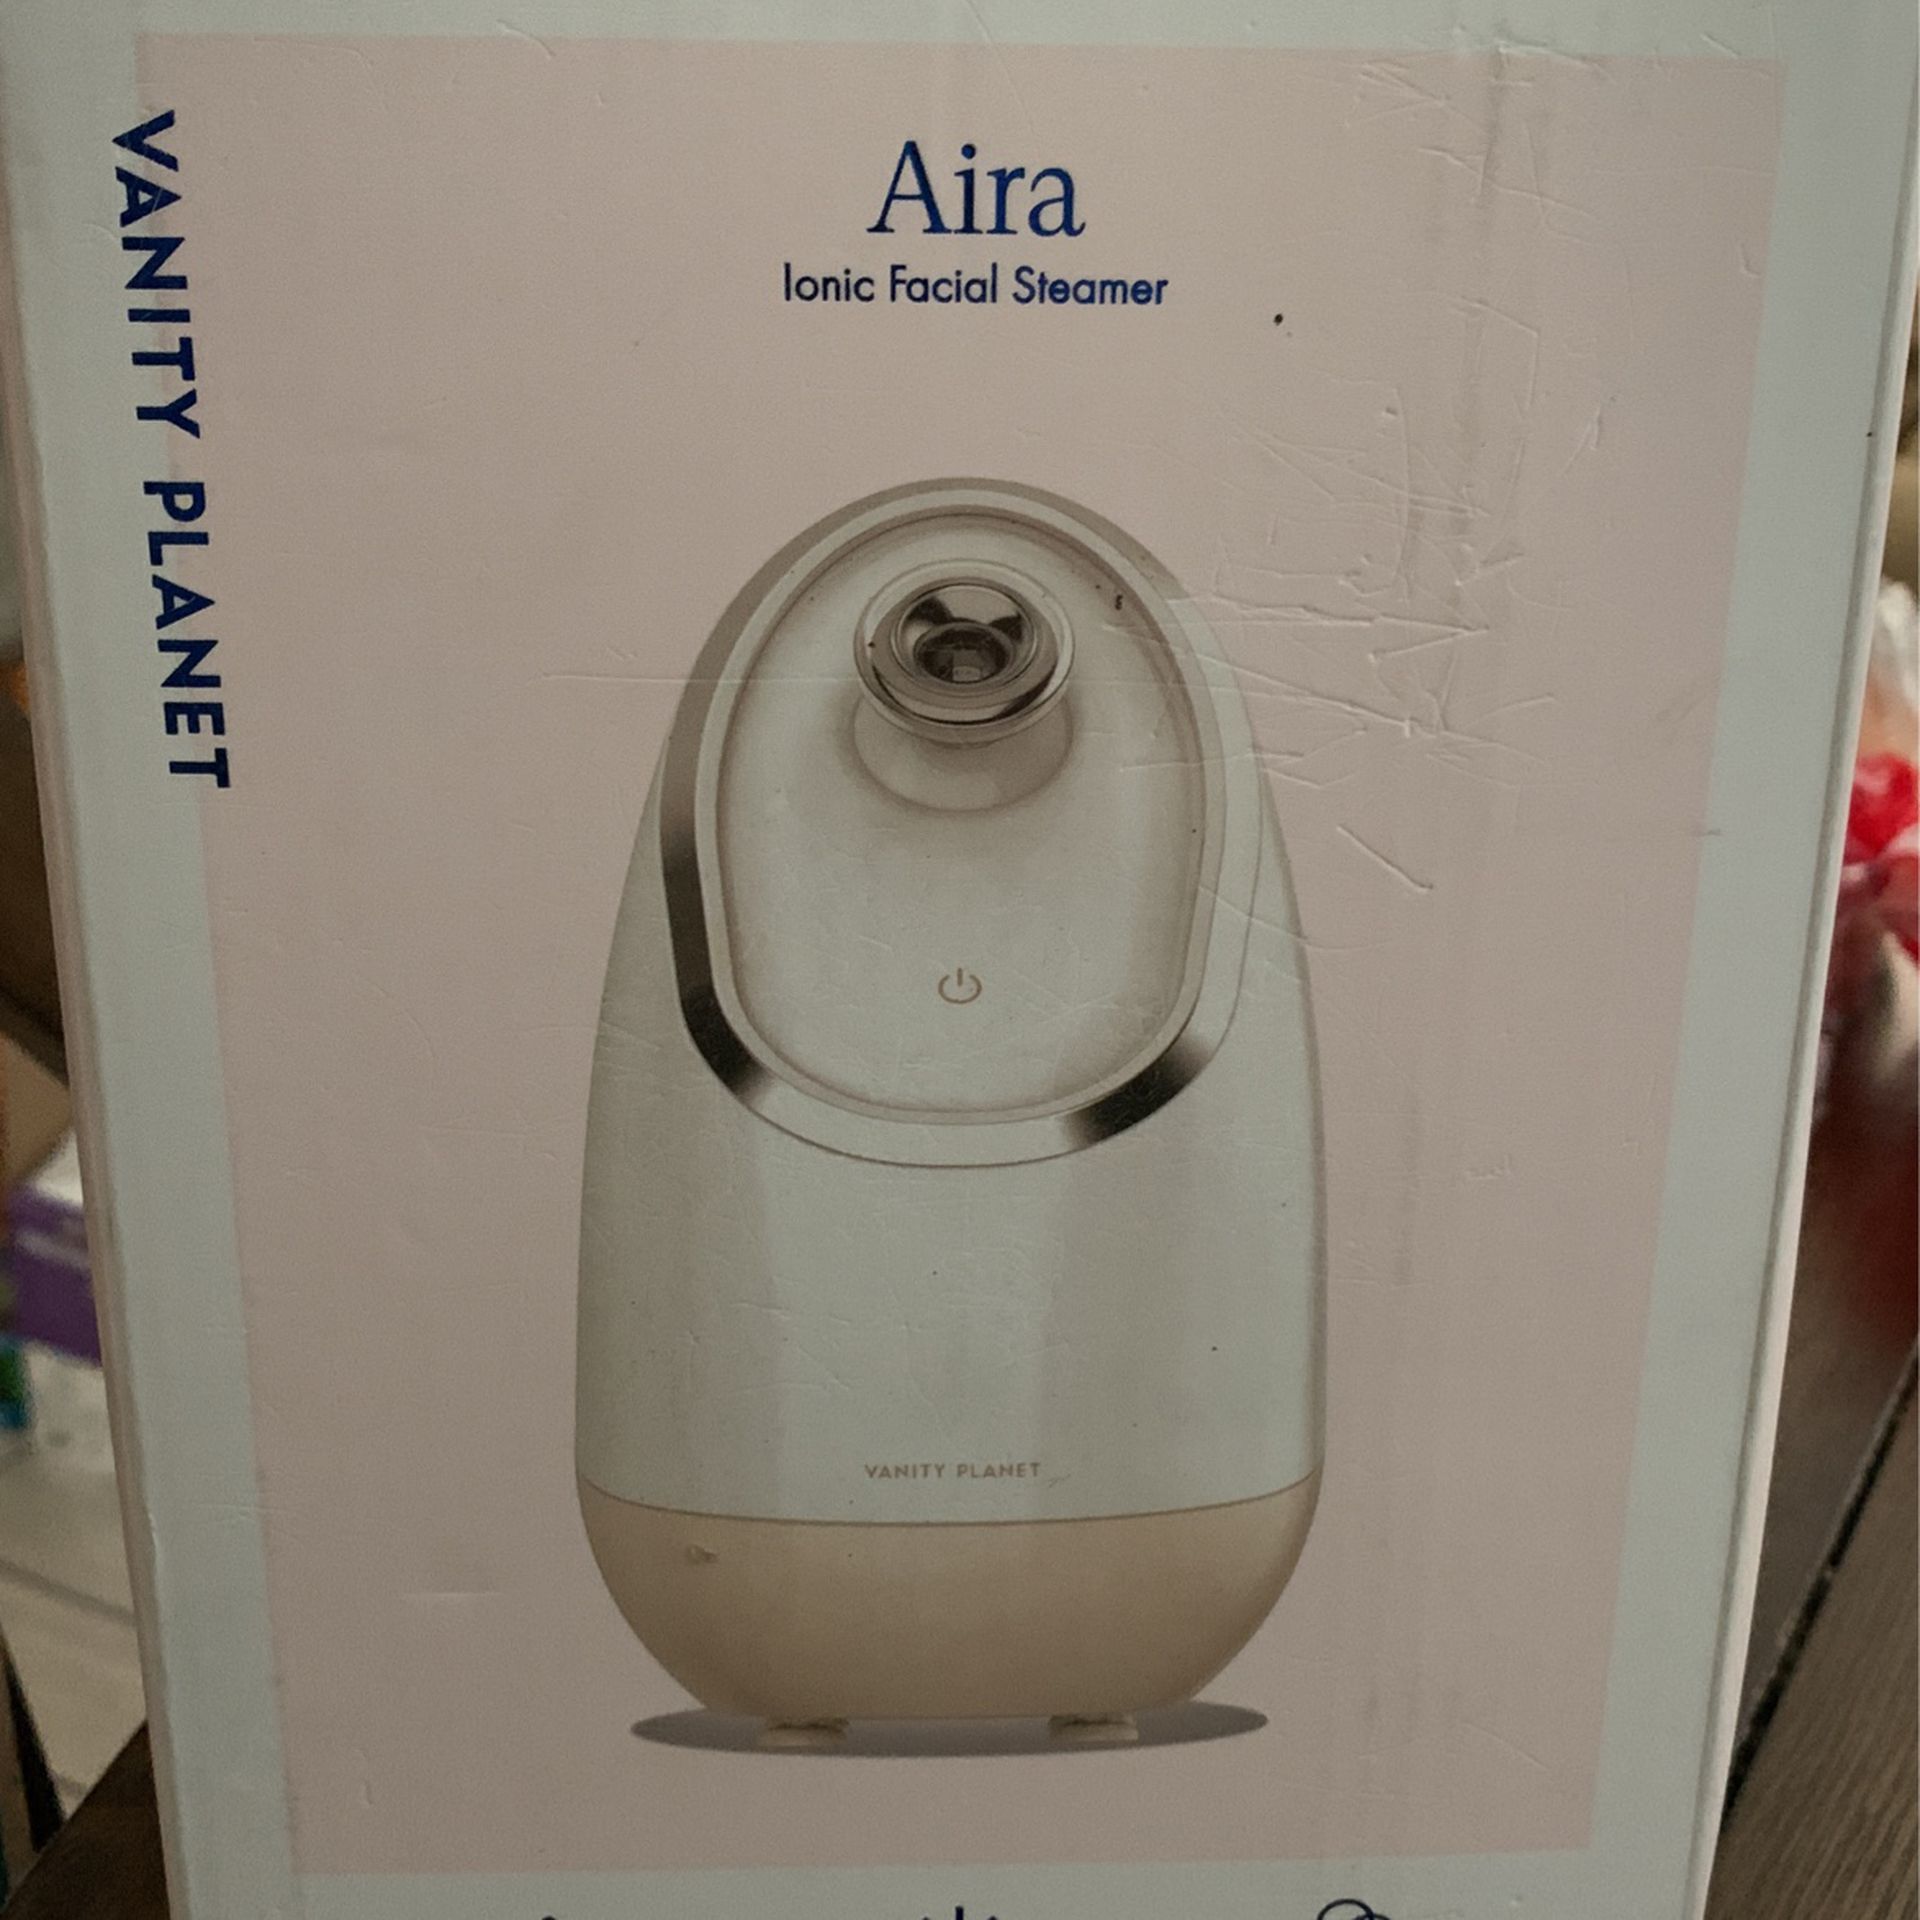 Brand New Aria Ionic Facial Steamer By Vanity Planet